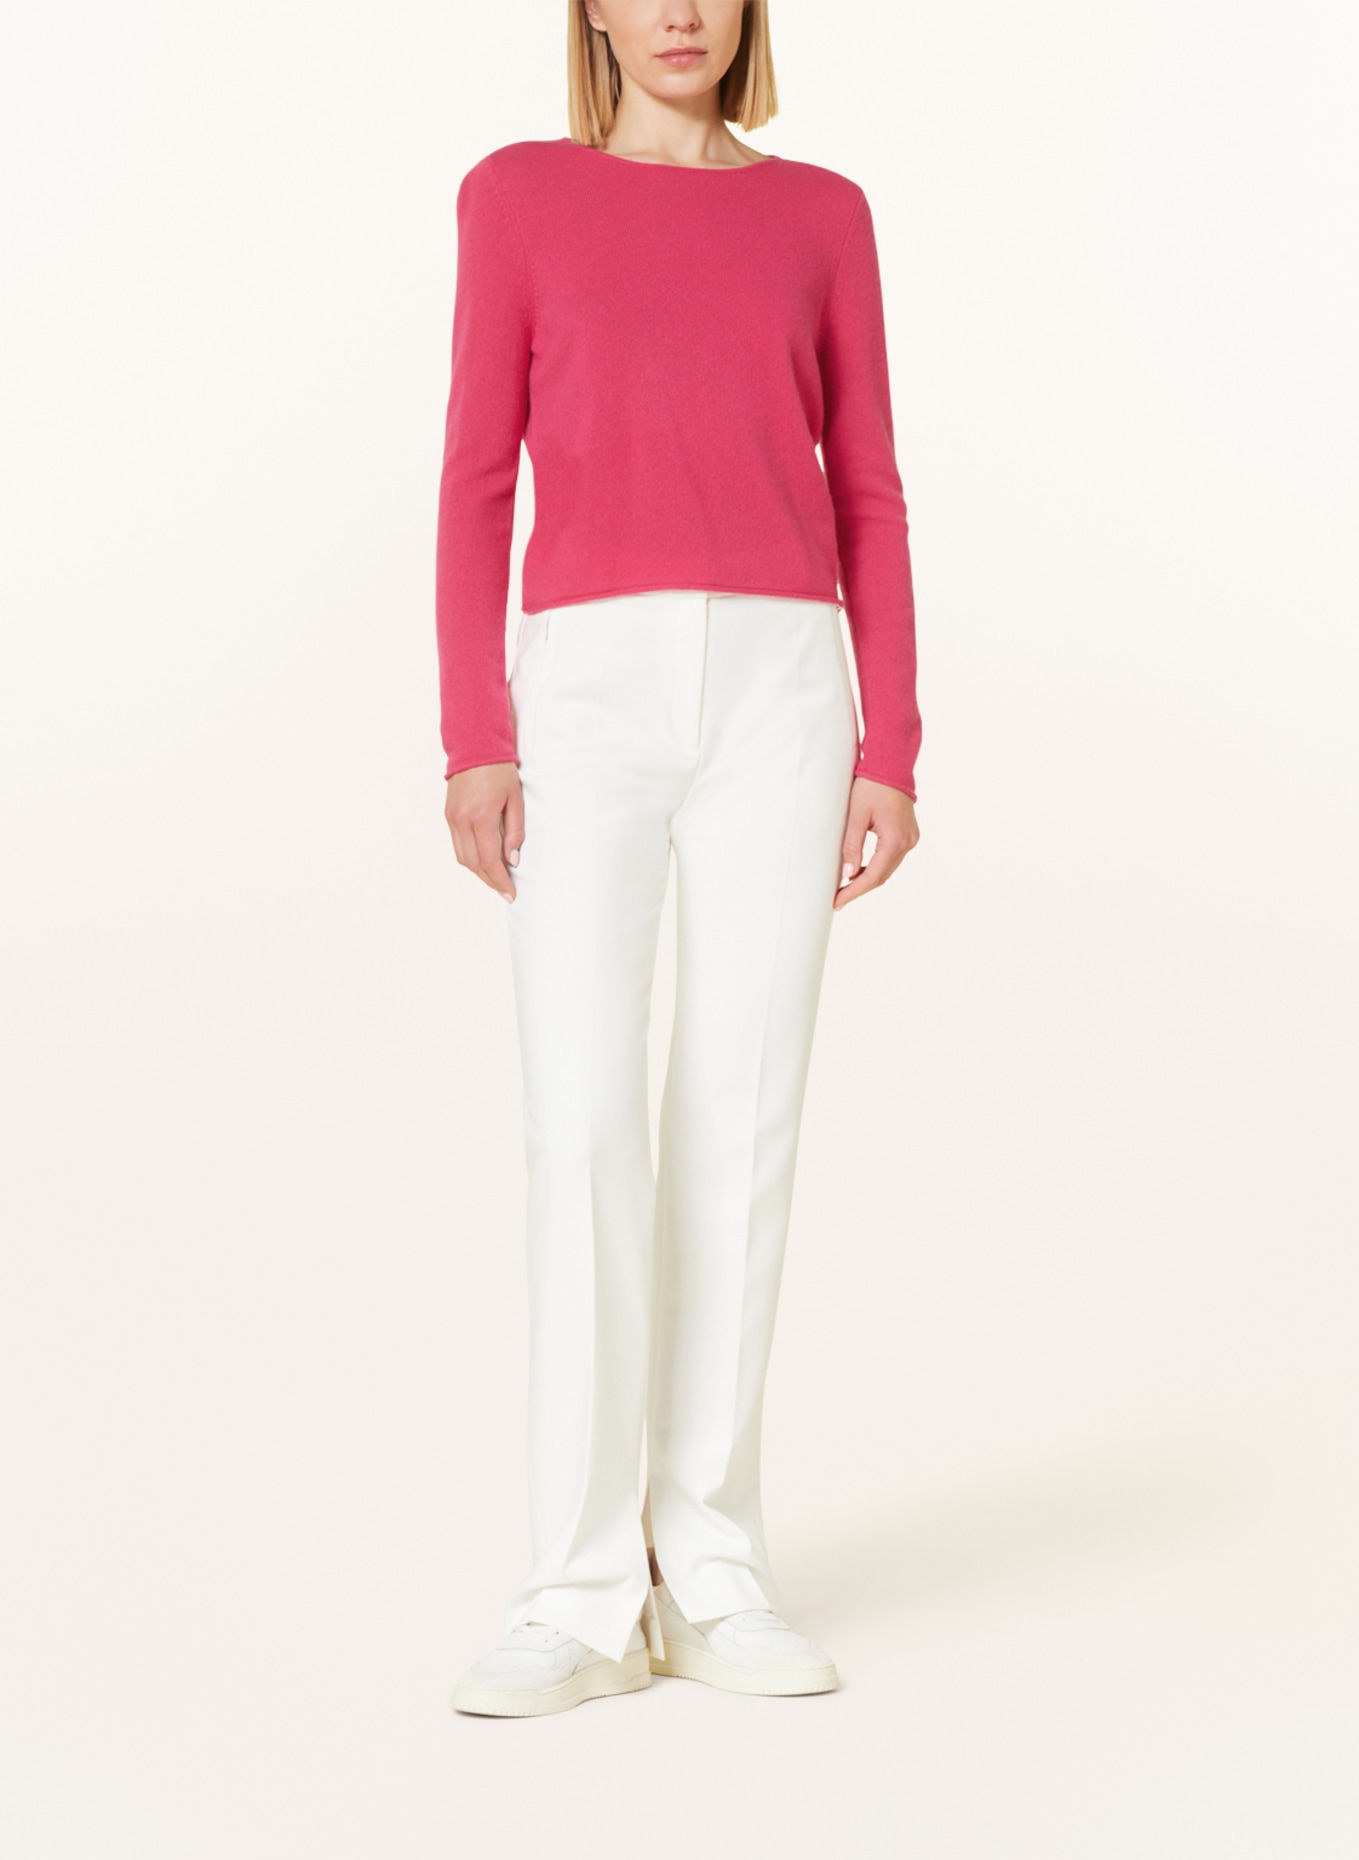 lilienfels Cashmere-Pullover , Farbe: PINK (Bild 2)